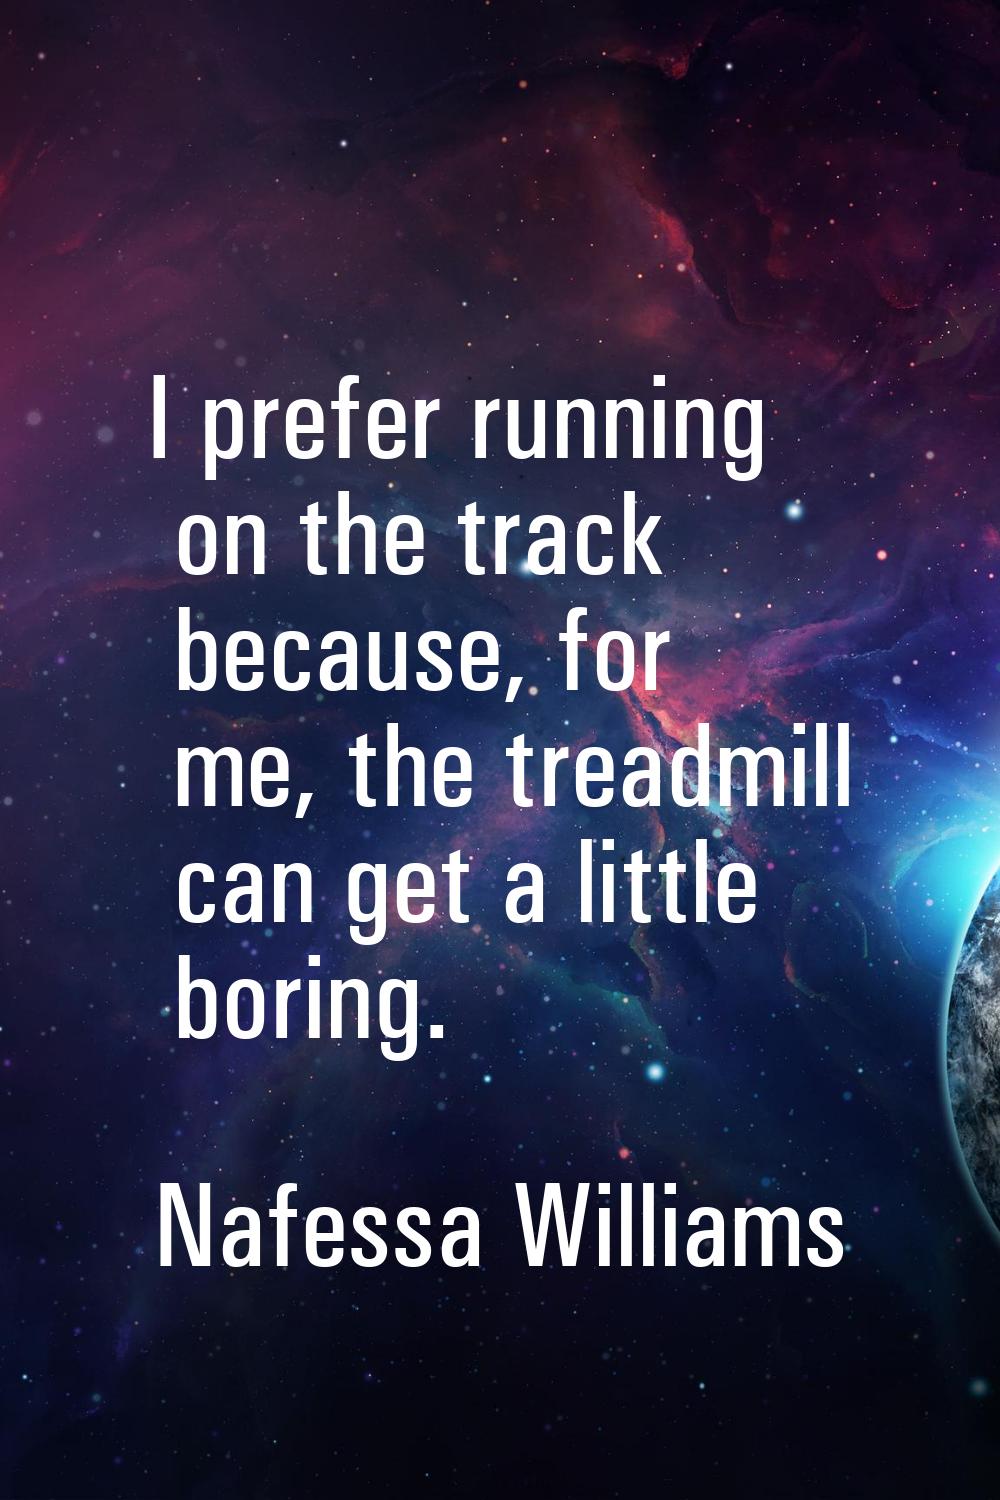 I prefer running on the track because, for me, the treadmill can get a little boring.